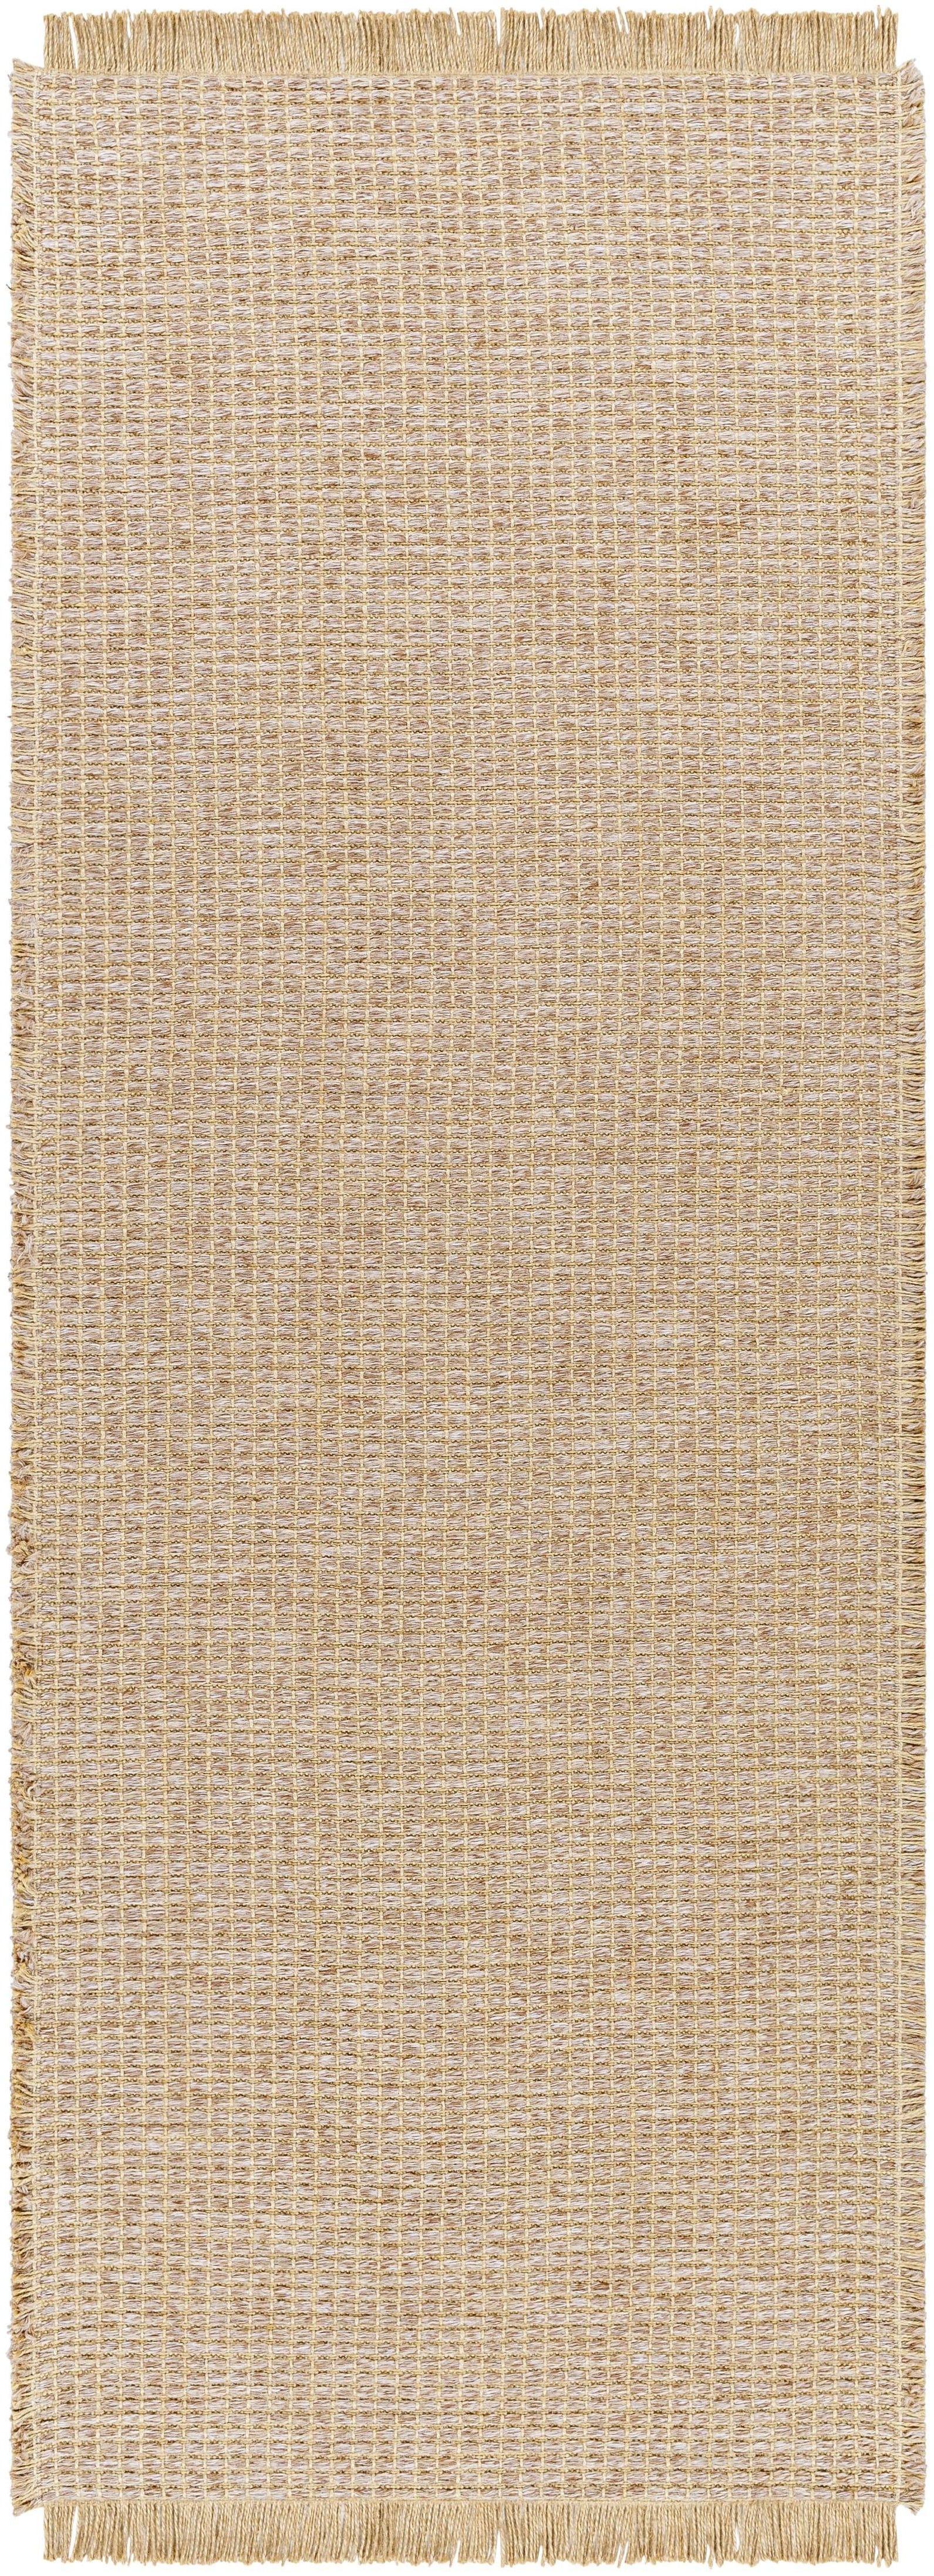 Introducing the Kimi area rug, a beautiful collaboration between Surya and Becki Owens. This one-of-a-kind piece is designed to bring a special style to any space. The unique stitched design incorporates natural elements with a rich brown hue to create a textural woven effect. Amethyst Home provides interior design, new home construction design consulting, vintage area rugs, and lighting in the Park City metro area.